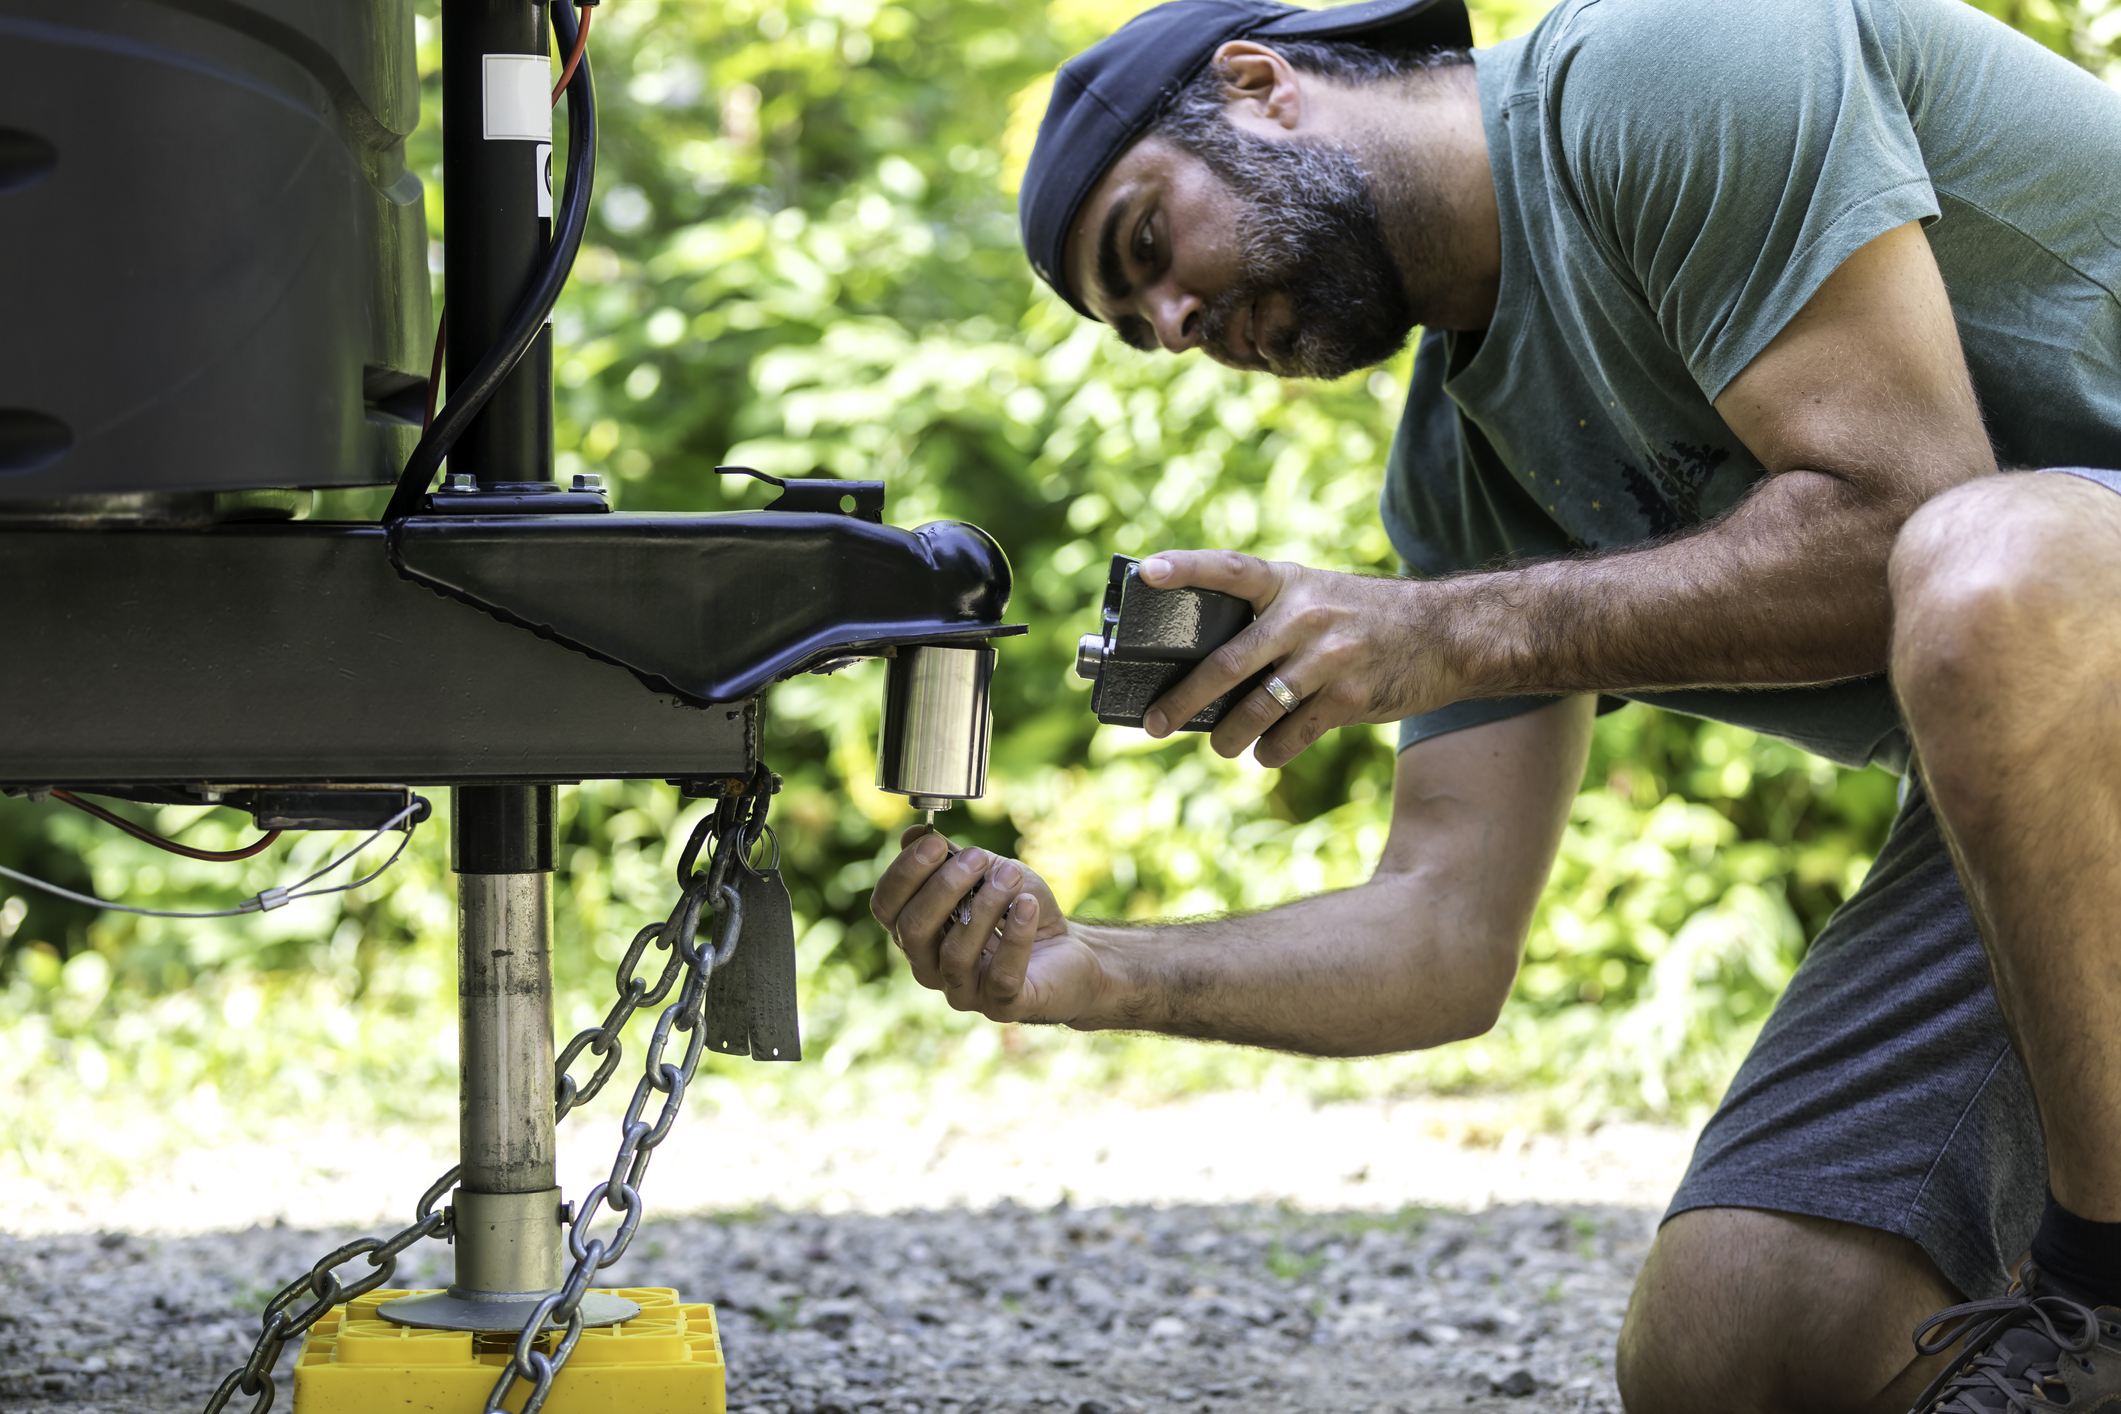 A man is Installing the camper trailer padlock during camping in summer.